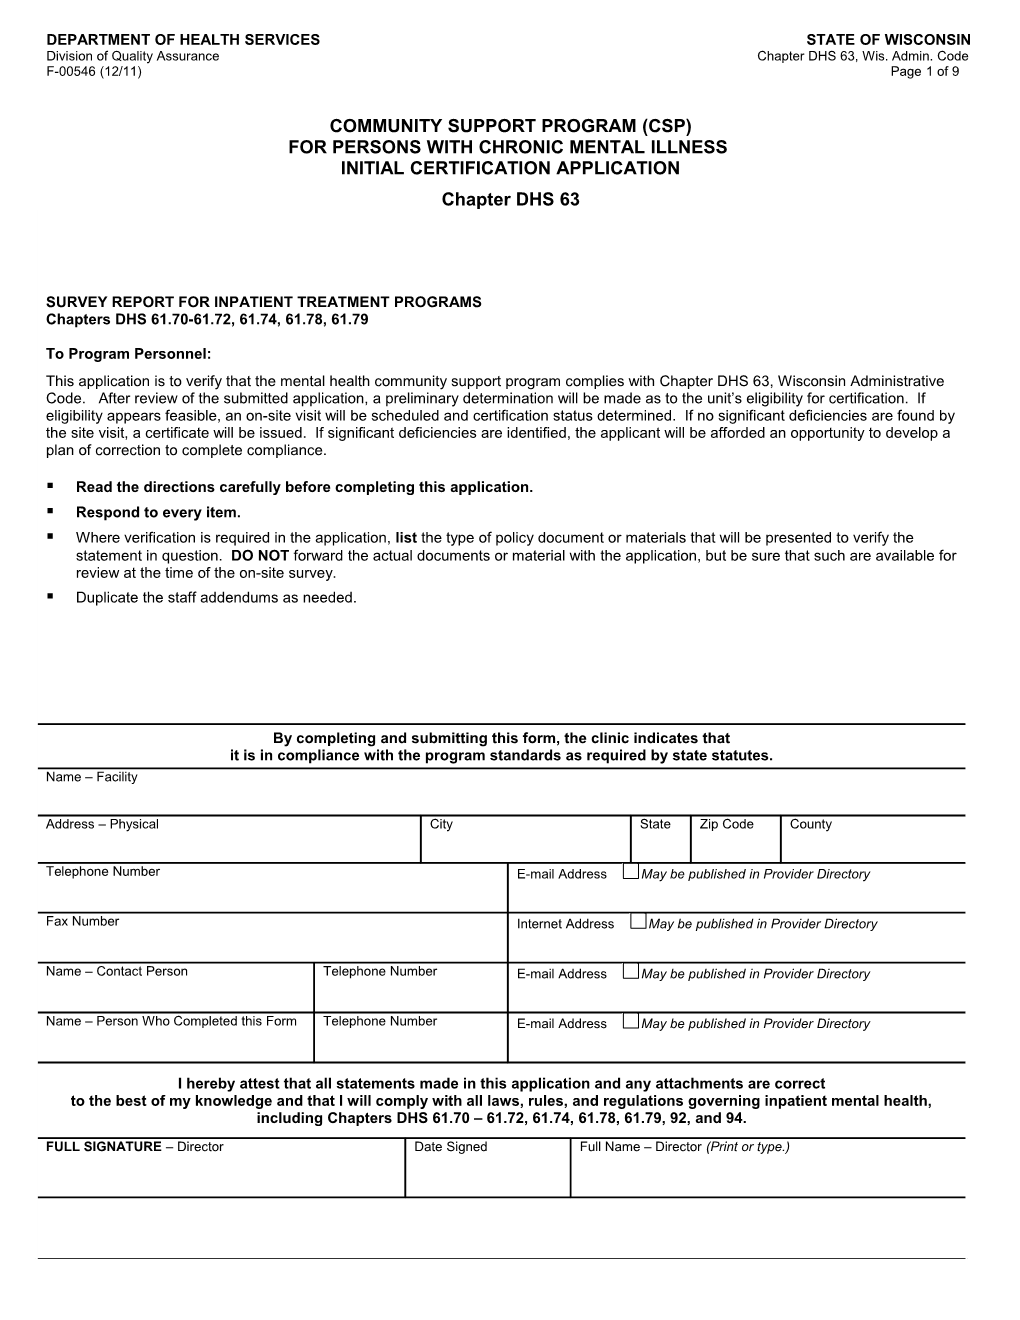 CSP for Persons with Chronic Mental Illness Initial Certification Application-DHS 63, F-00546